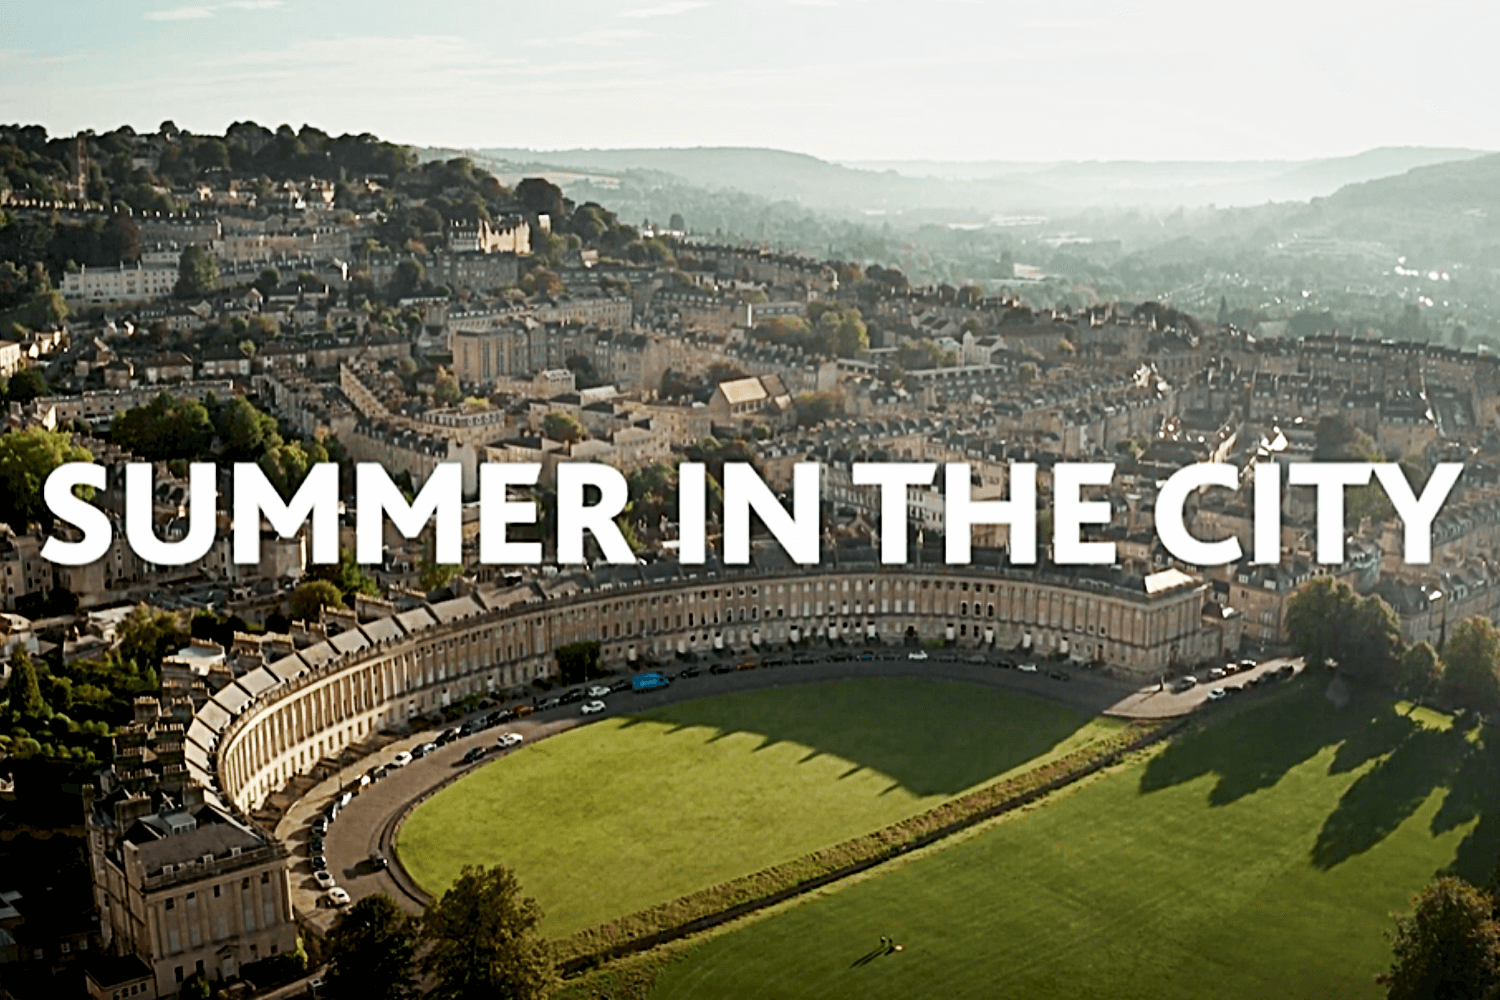 A wide shot of Bath, with the words 'Summer in the city' overlaid on top.